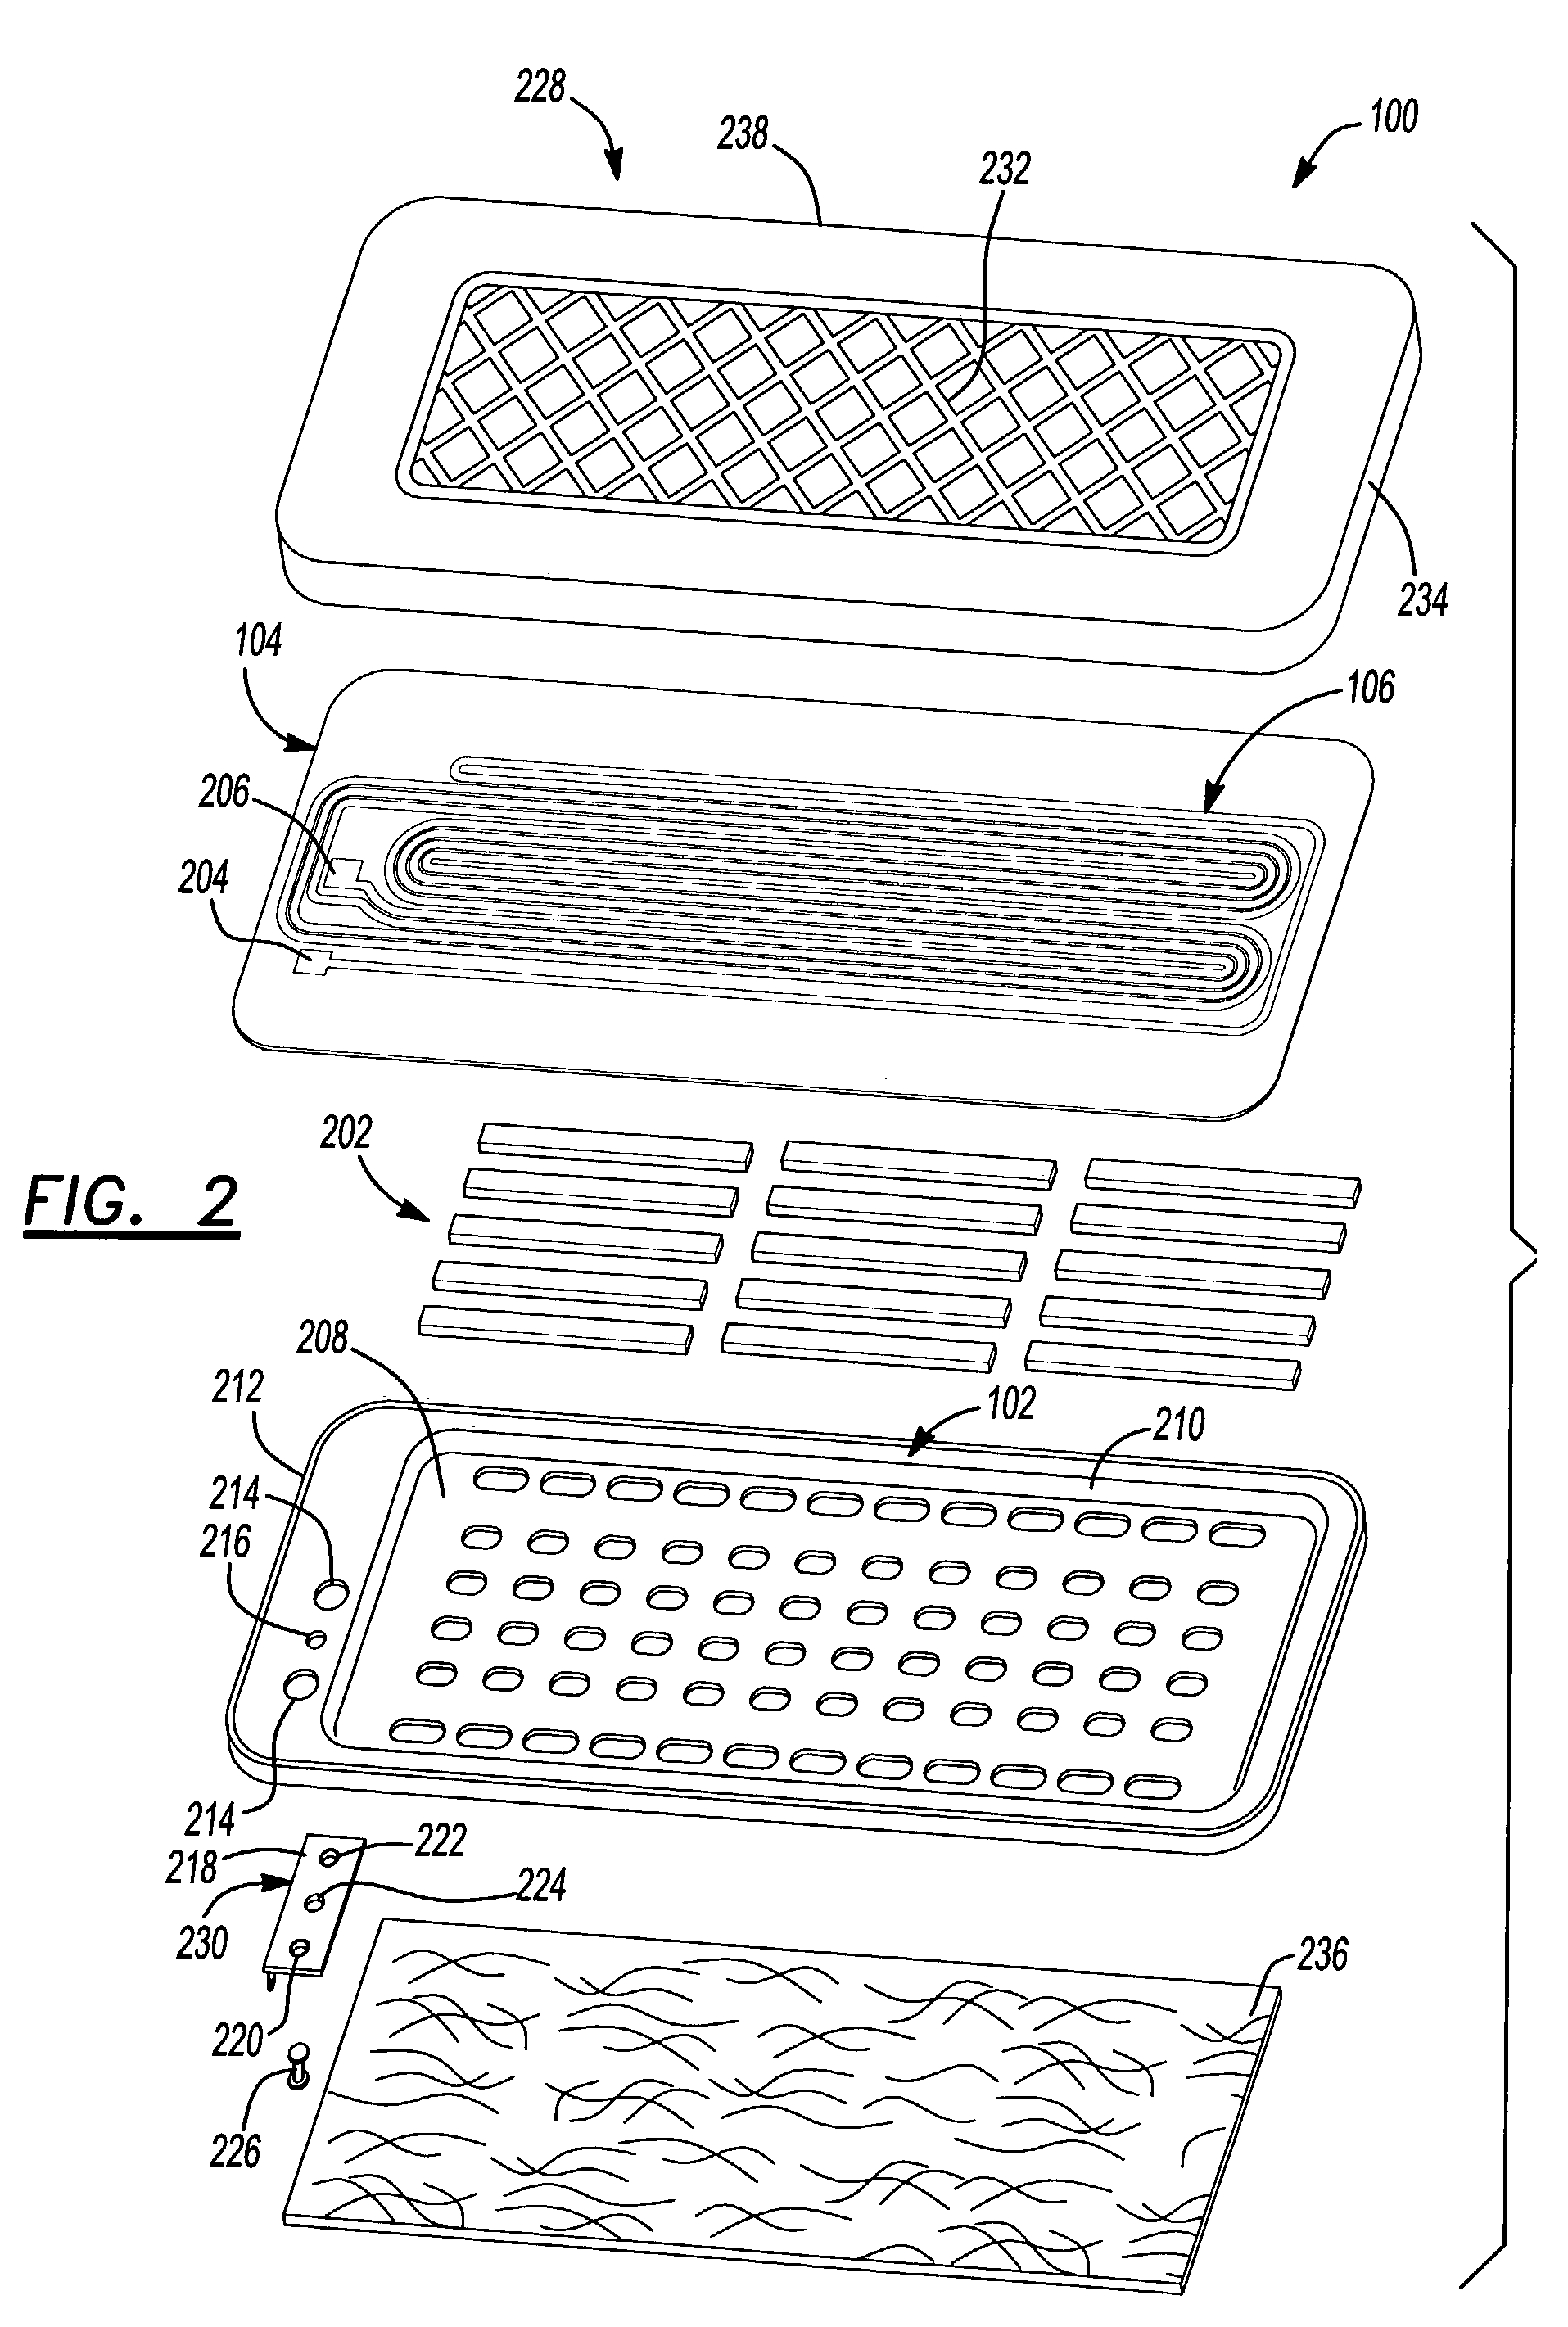 Conductors for electro-dynamic loudspeakers